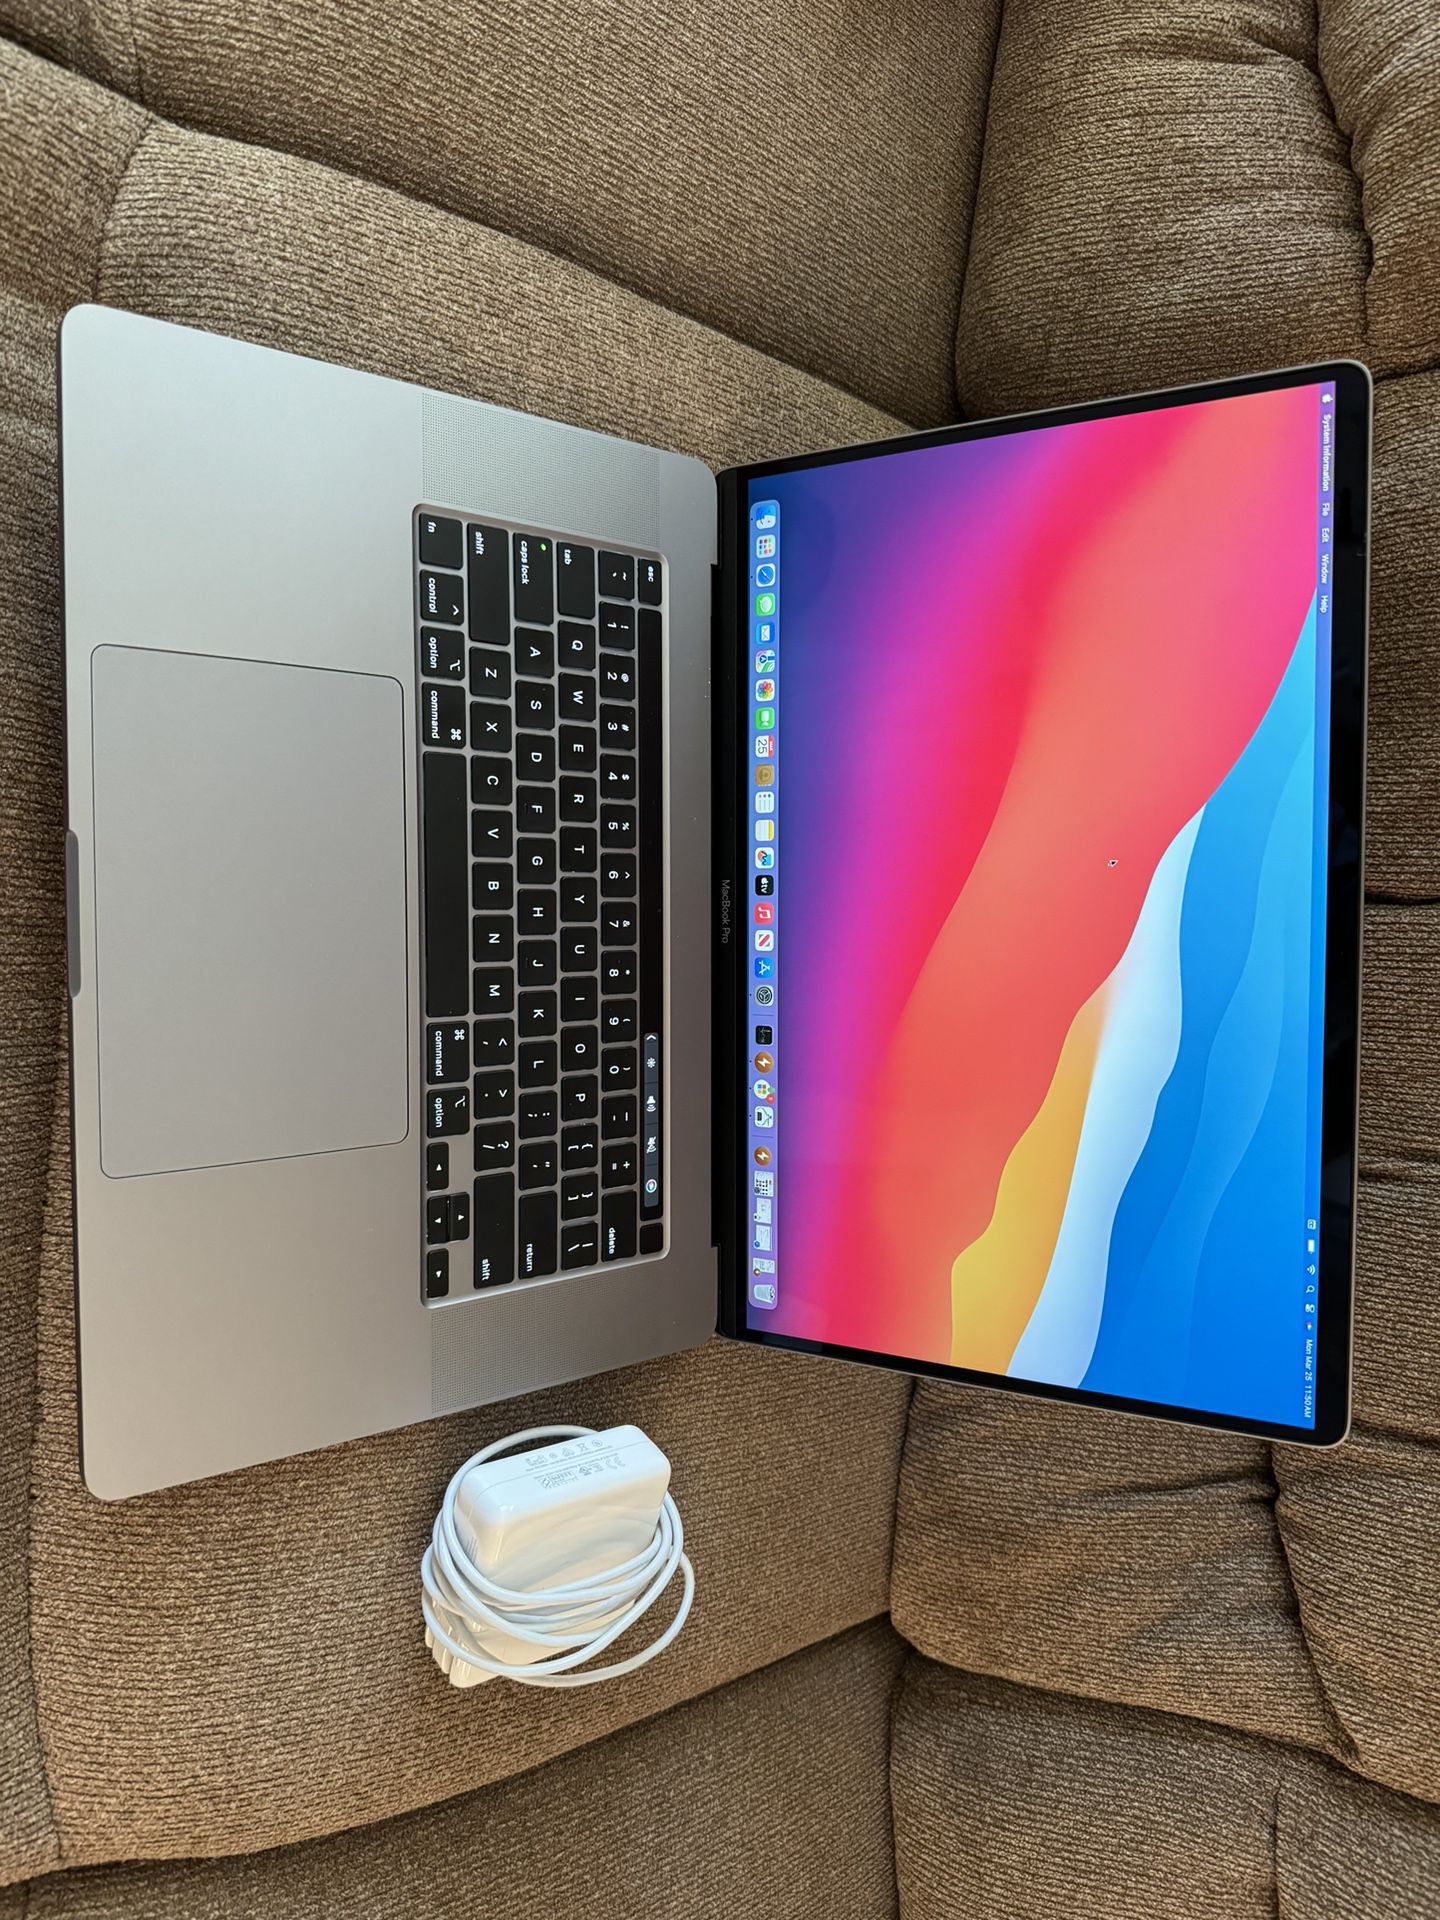 2019/2020 MacBook Pro 16”, i7 2.6ghz 6 Cores, 16gb ram,512gb.4GB graphic ,50 Battery Cycles, Fast